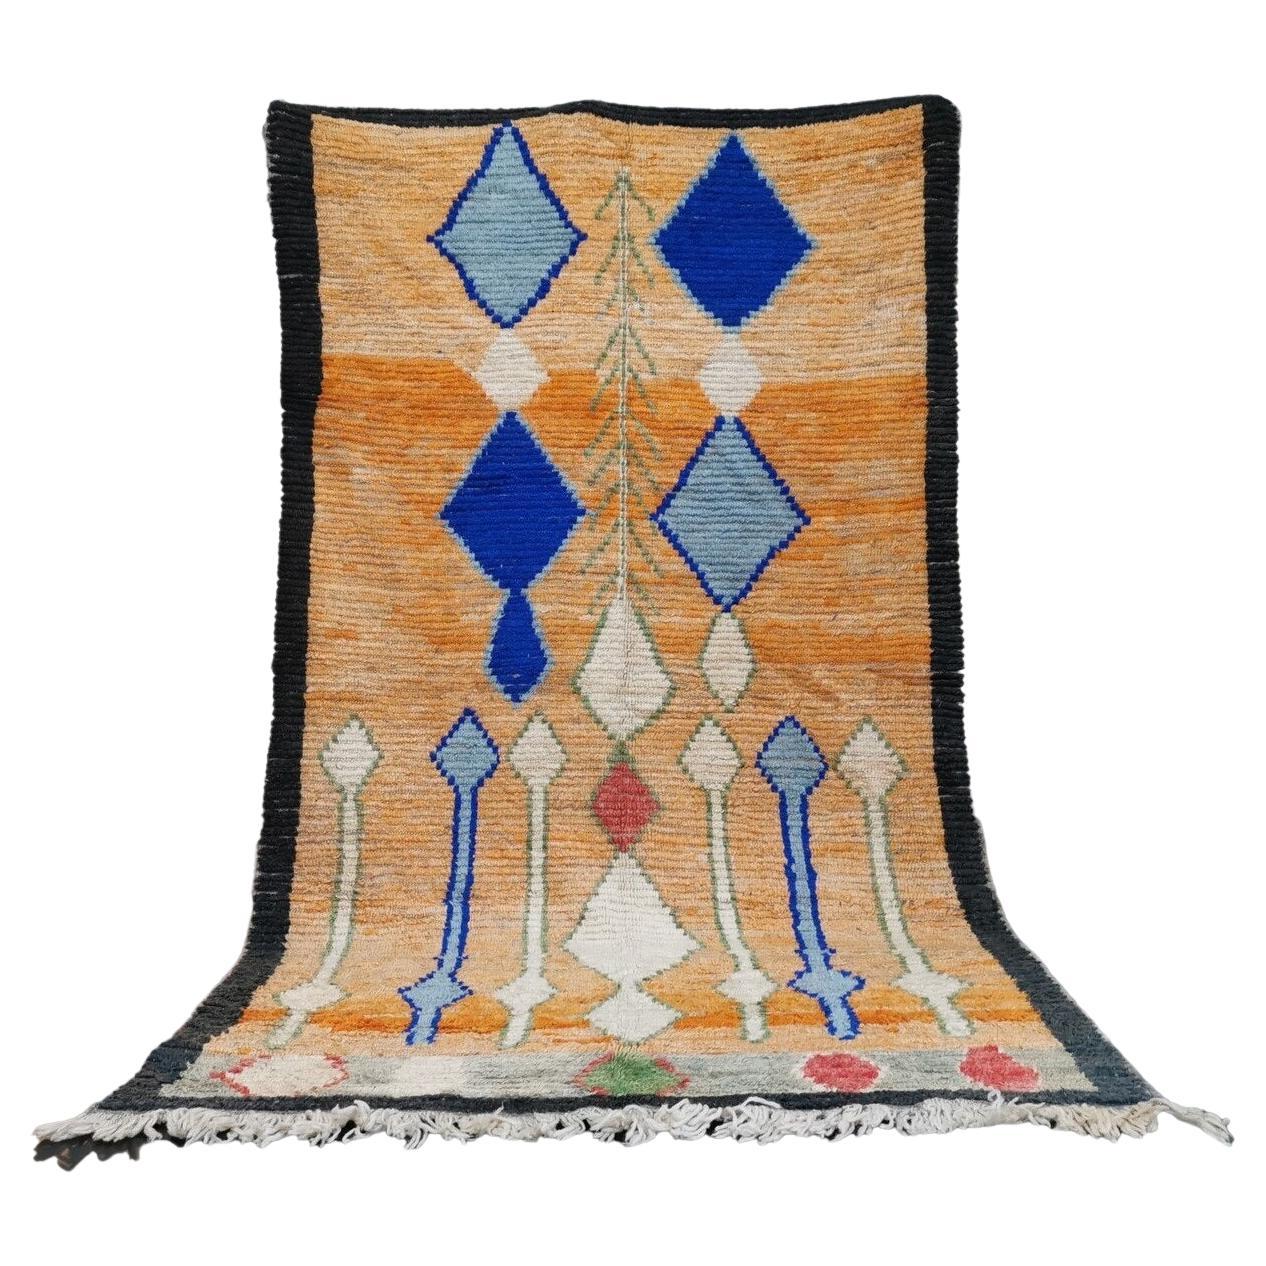 Moroccan Boujaad Rug in Orange with Blue Geometric Patterns